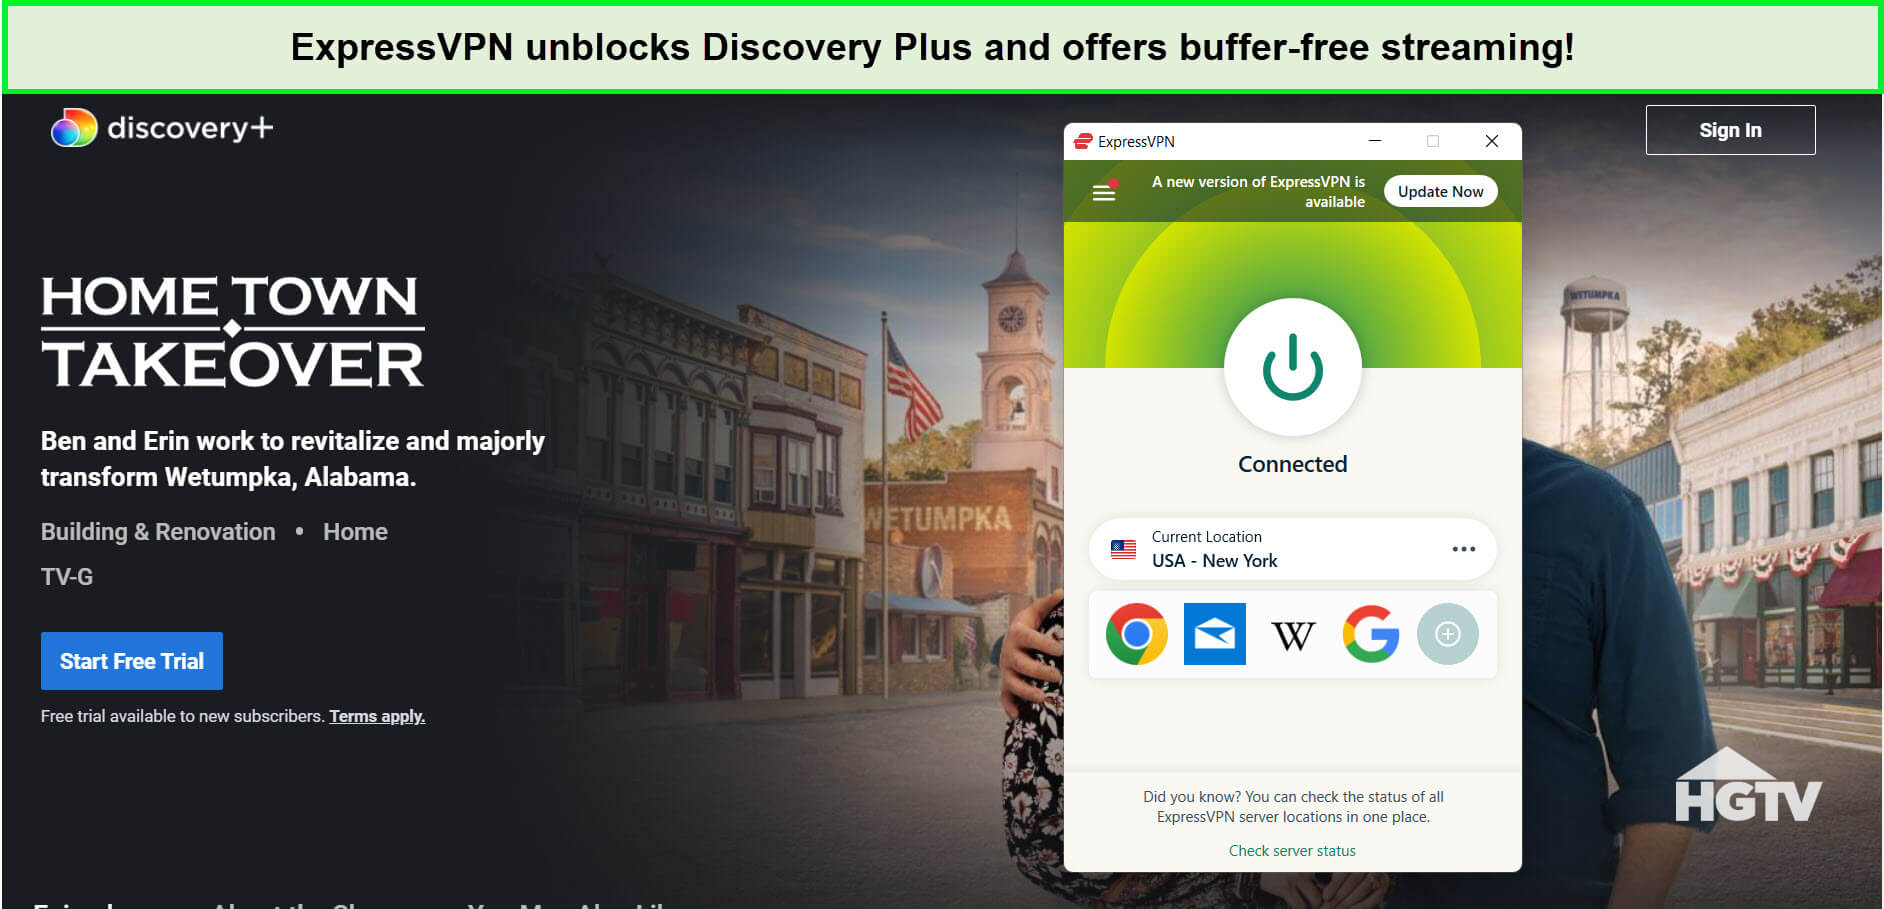 expressvpn-unblocks-hometown-takeover-season-two-on-discovery-plus-in-UAE